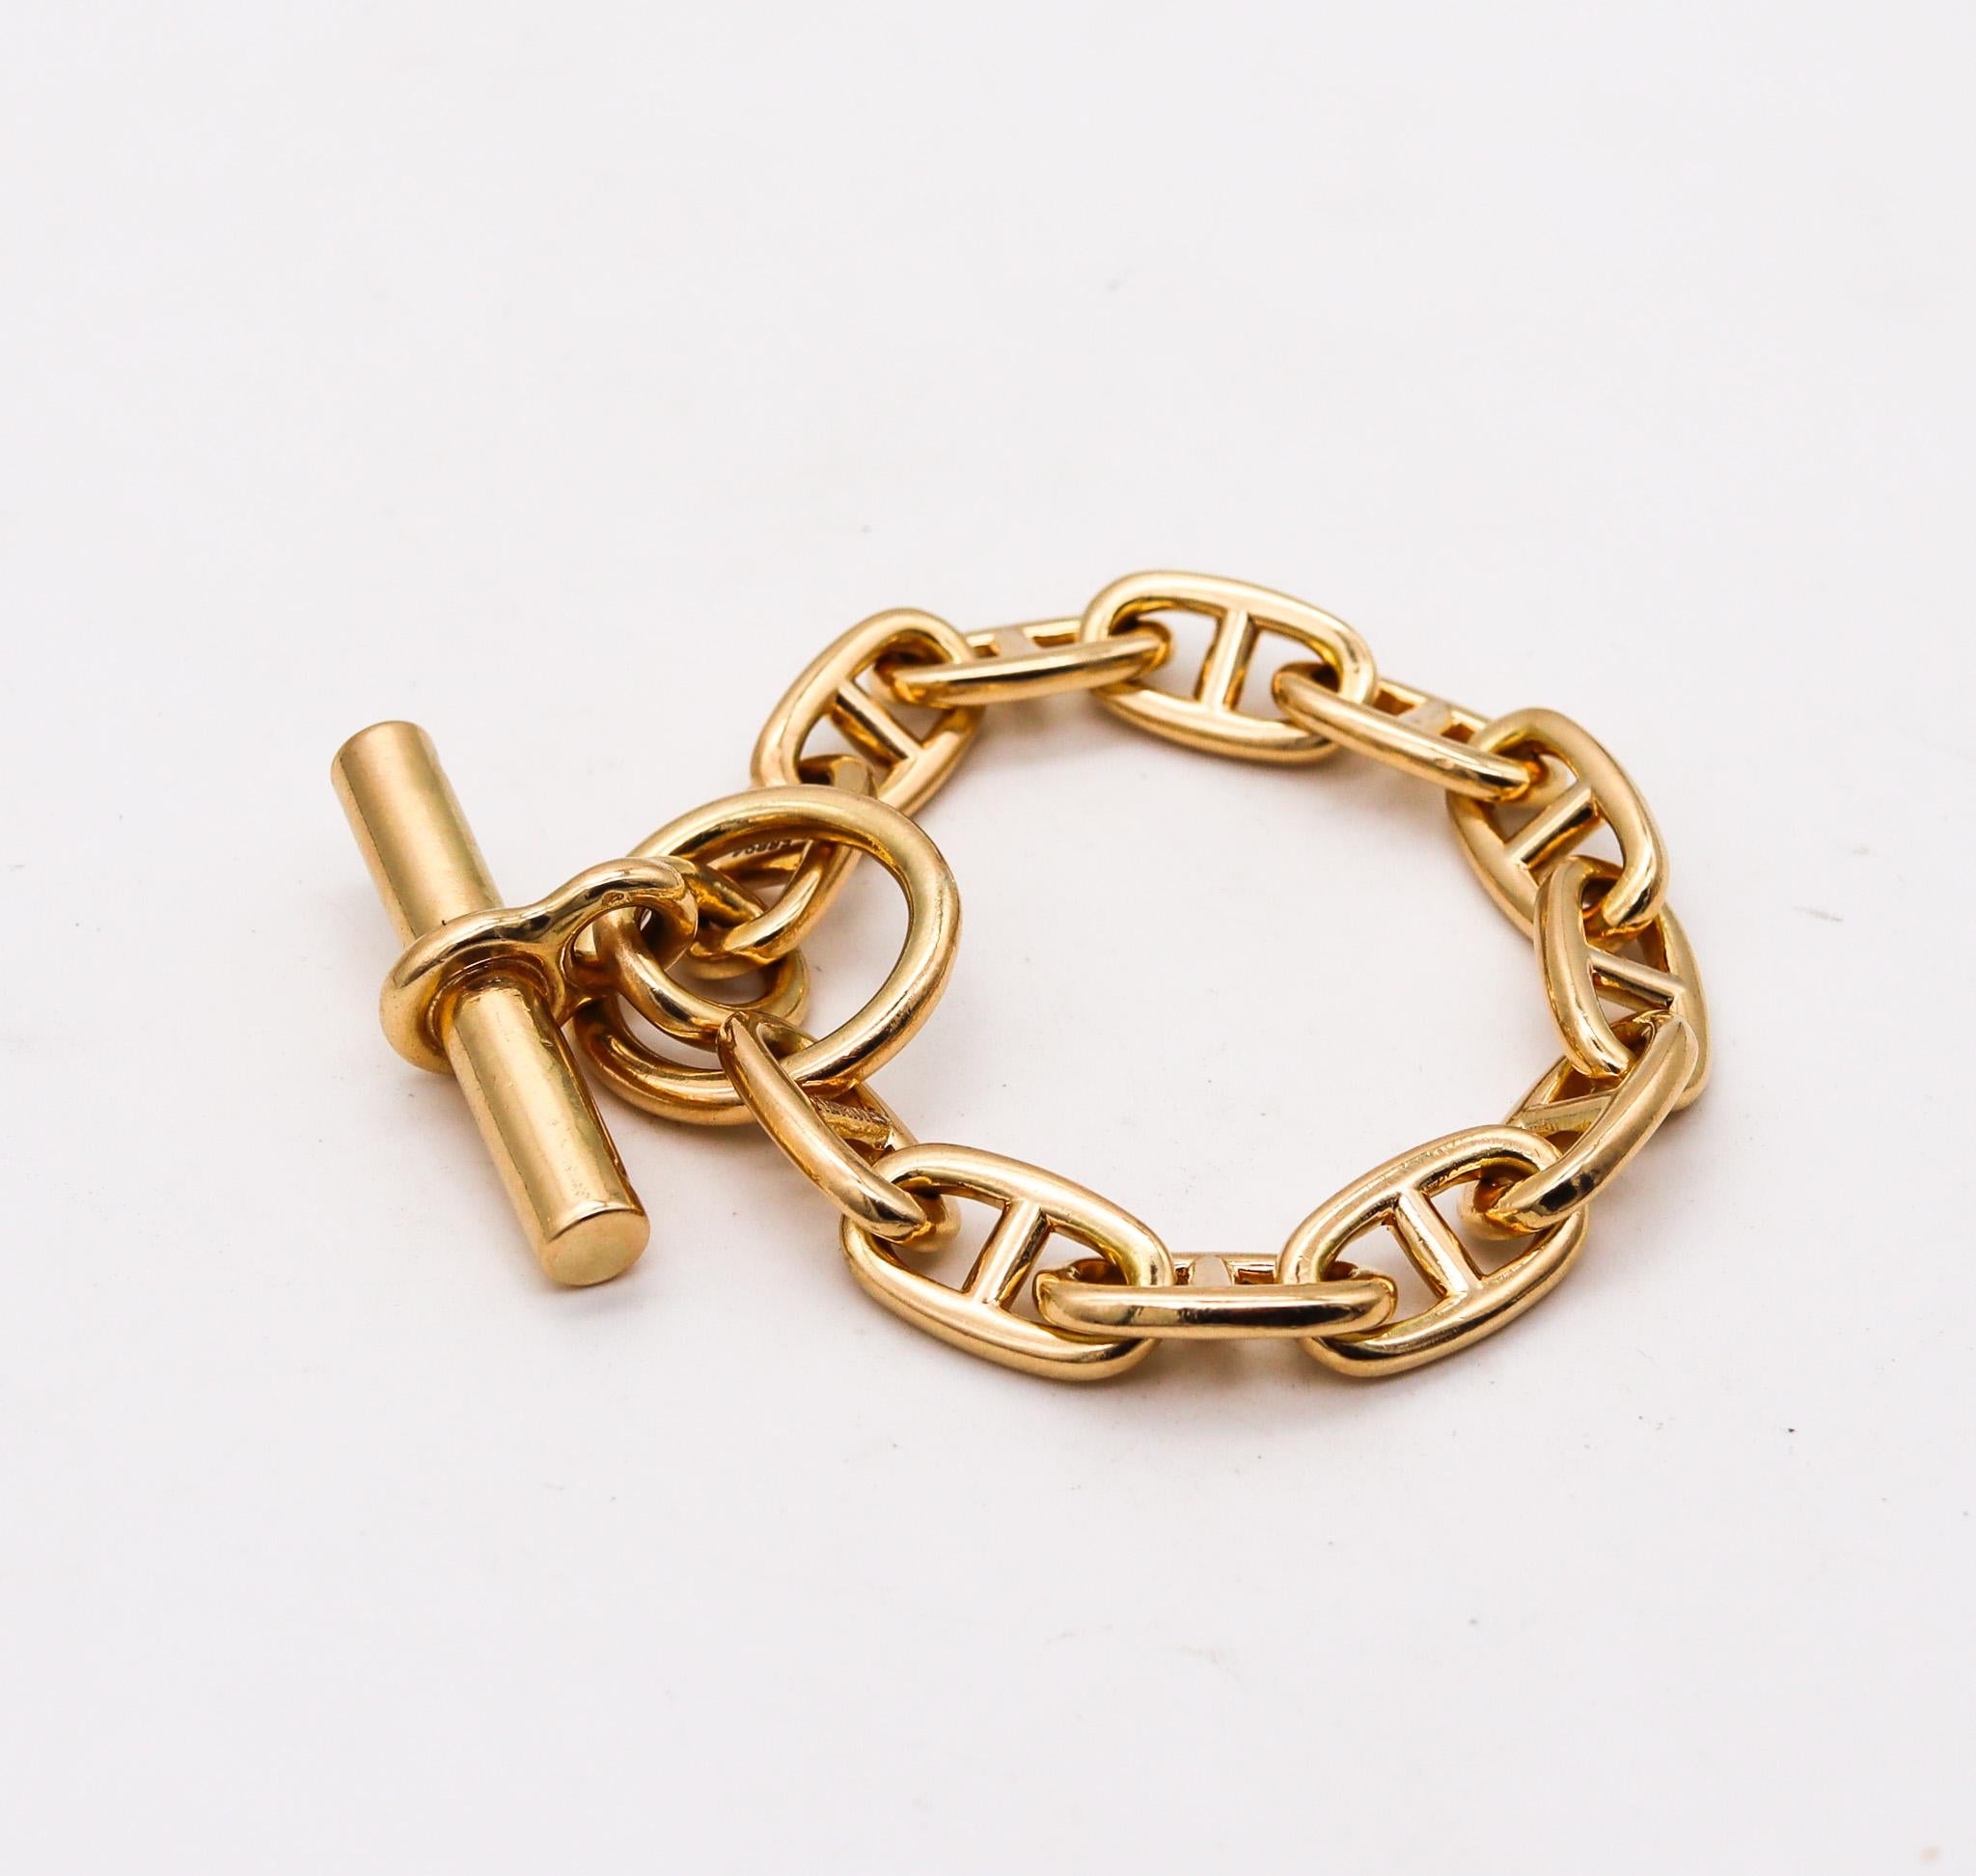 Sold at Auction: Hermes Gold-Plated Chaine D'Ancre Scarf Ring